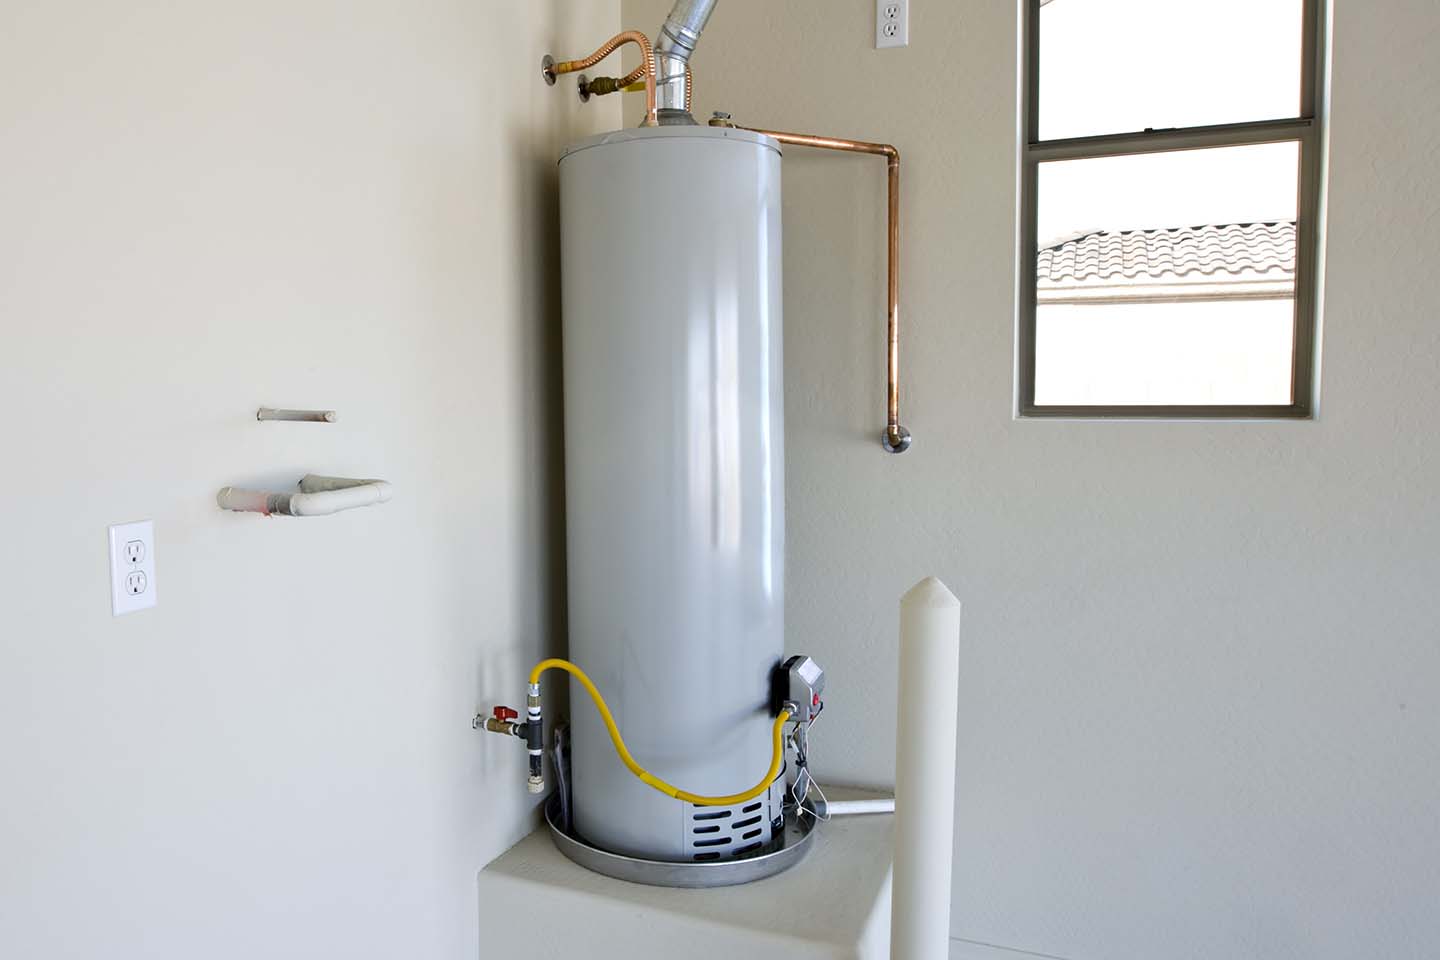 When was the water heater invented?